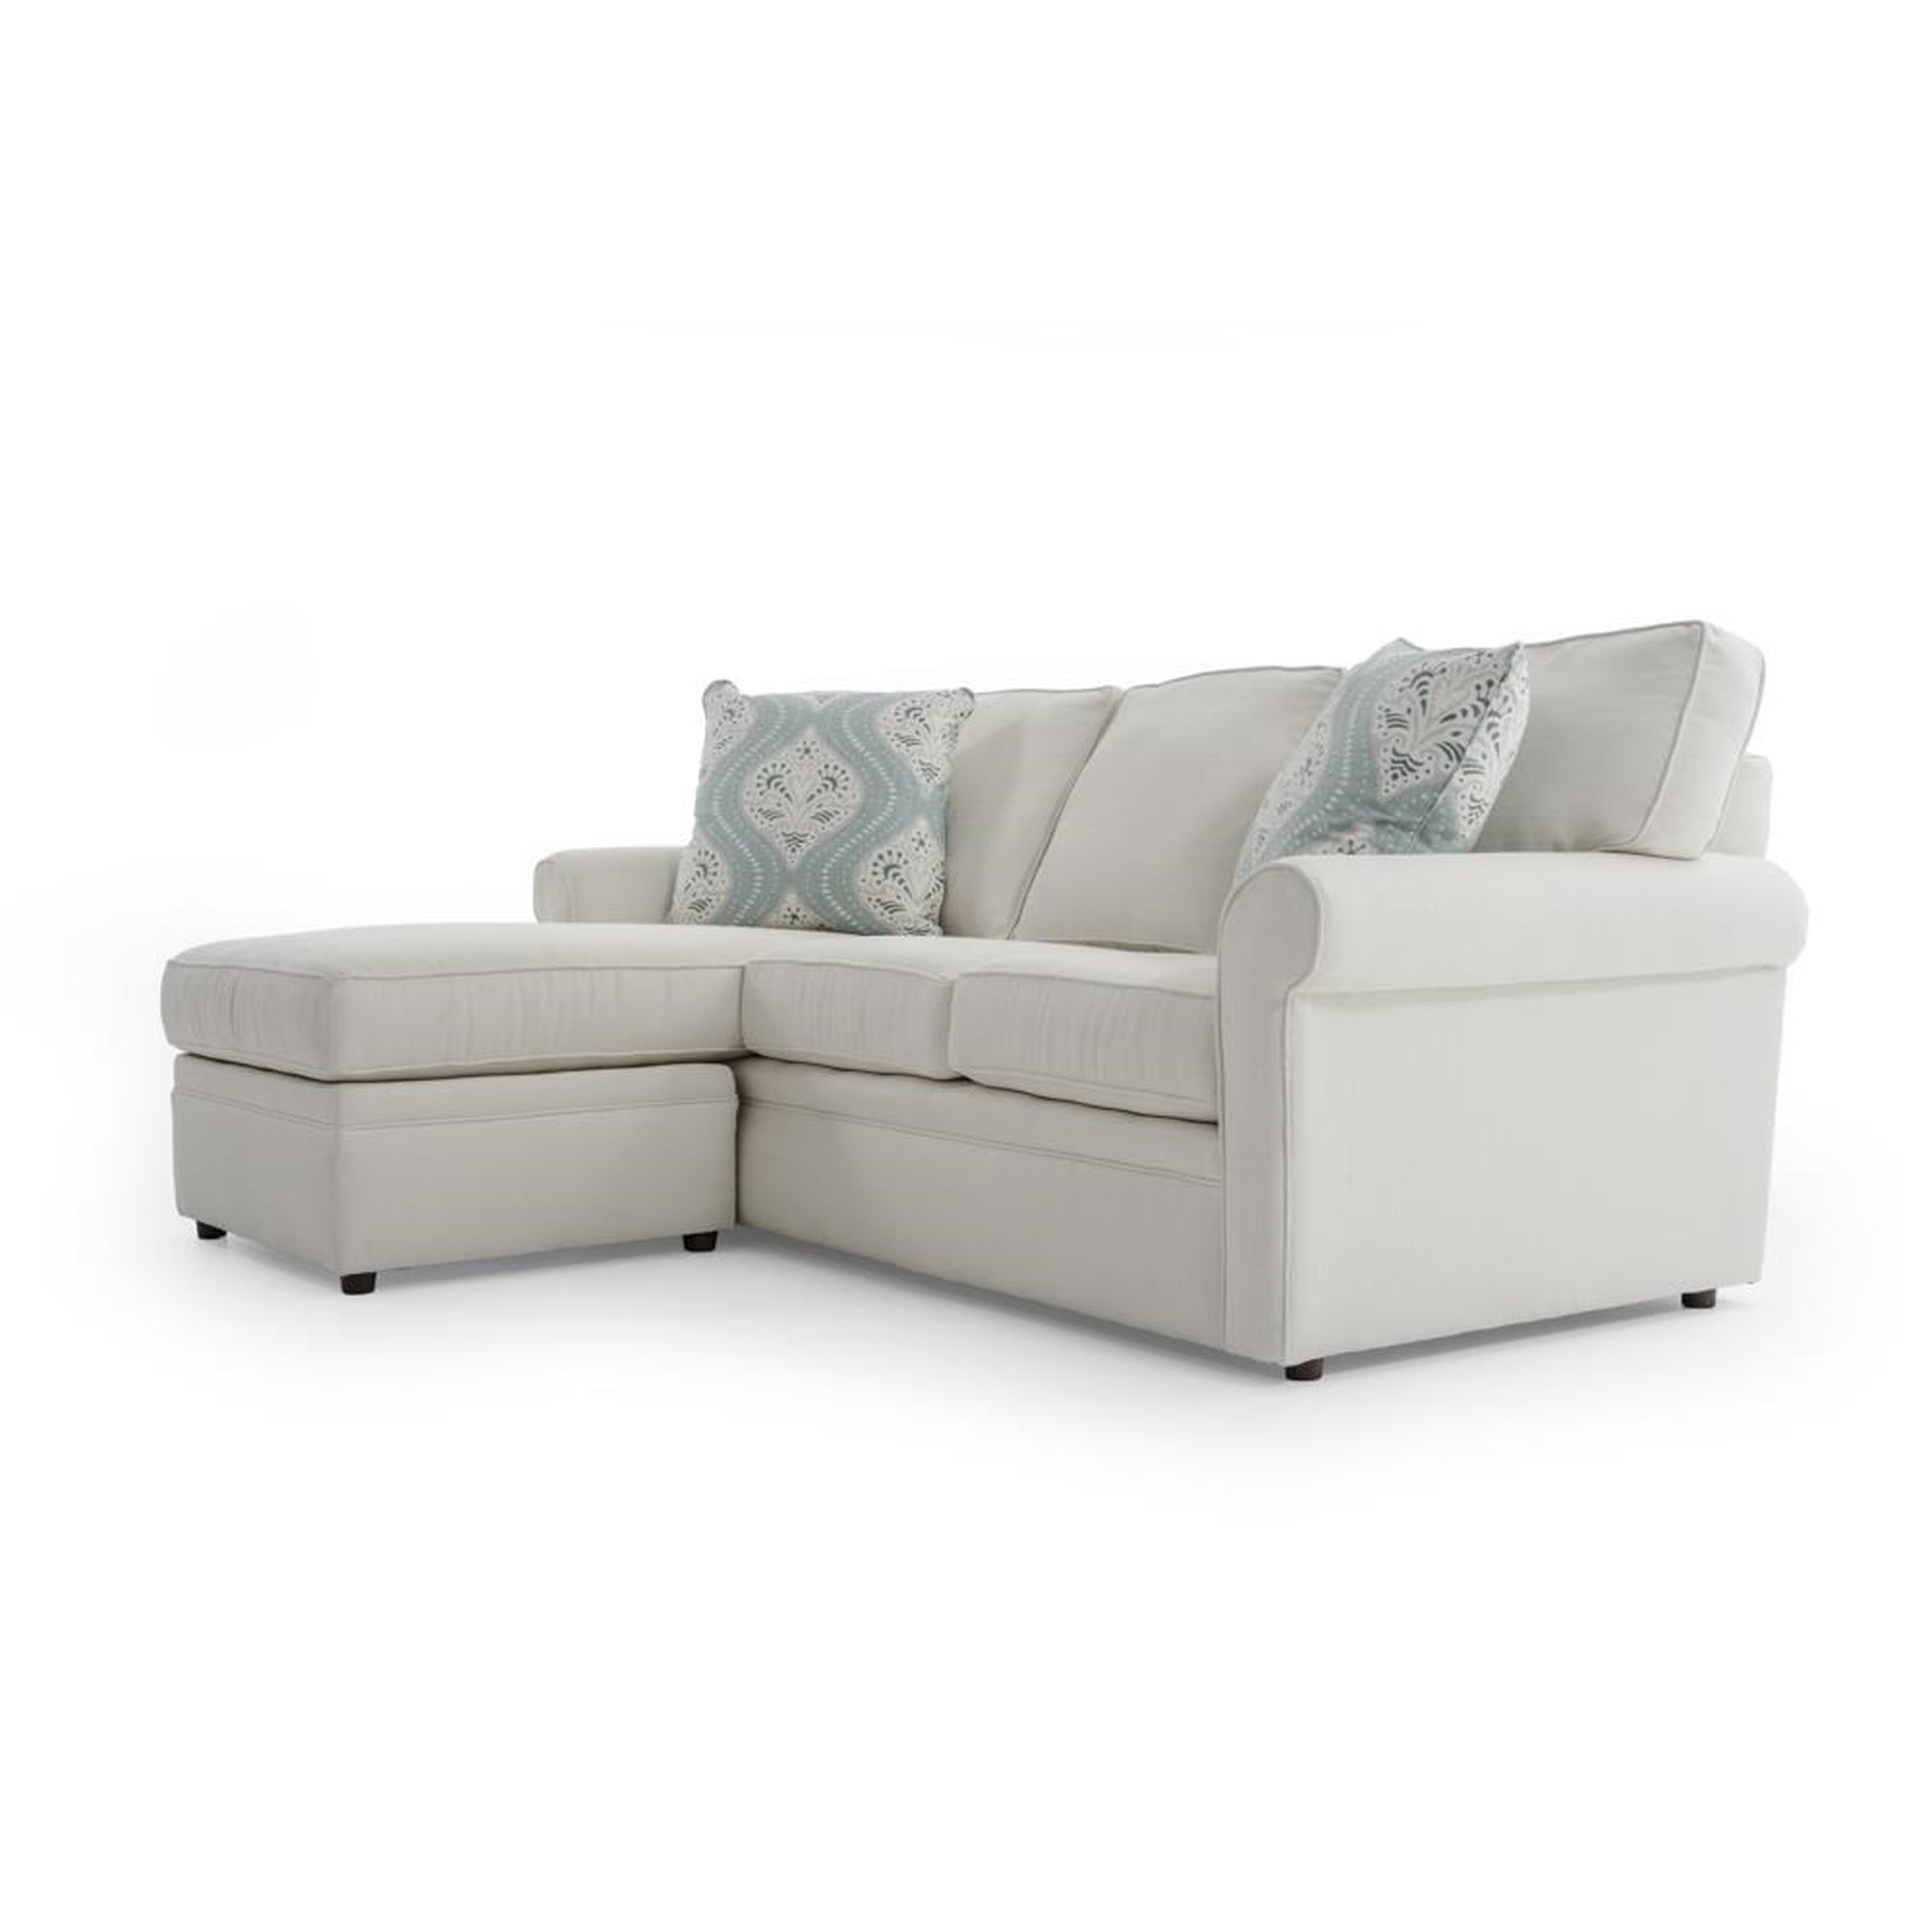 Dalton 3 Piece Chaise Sectional, Sofa With Chaise